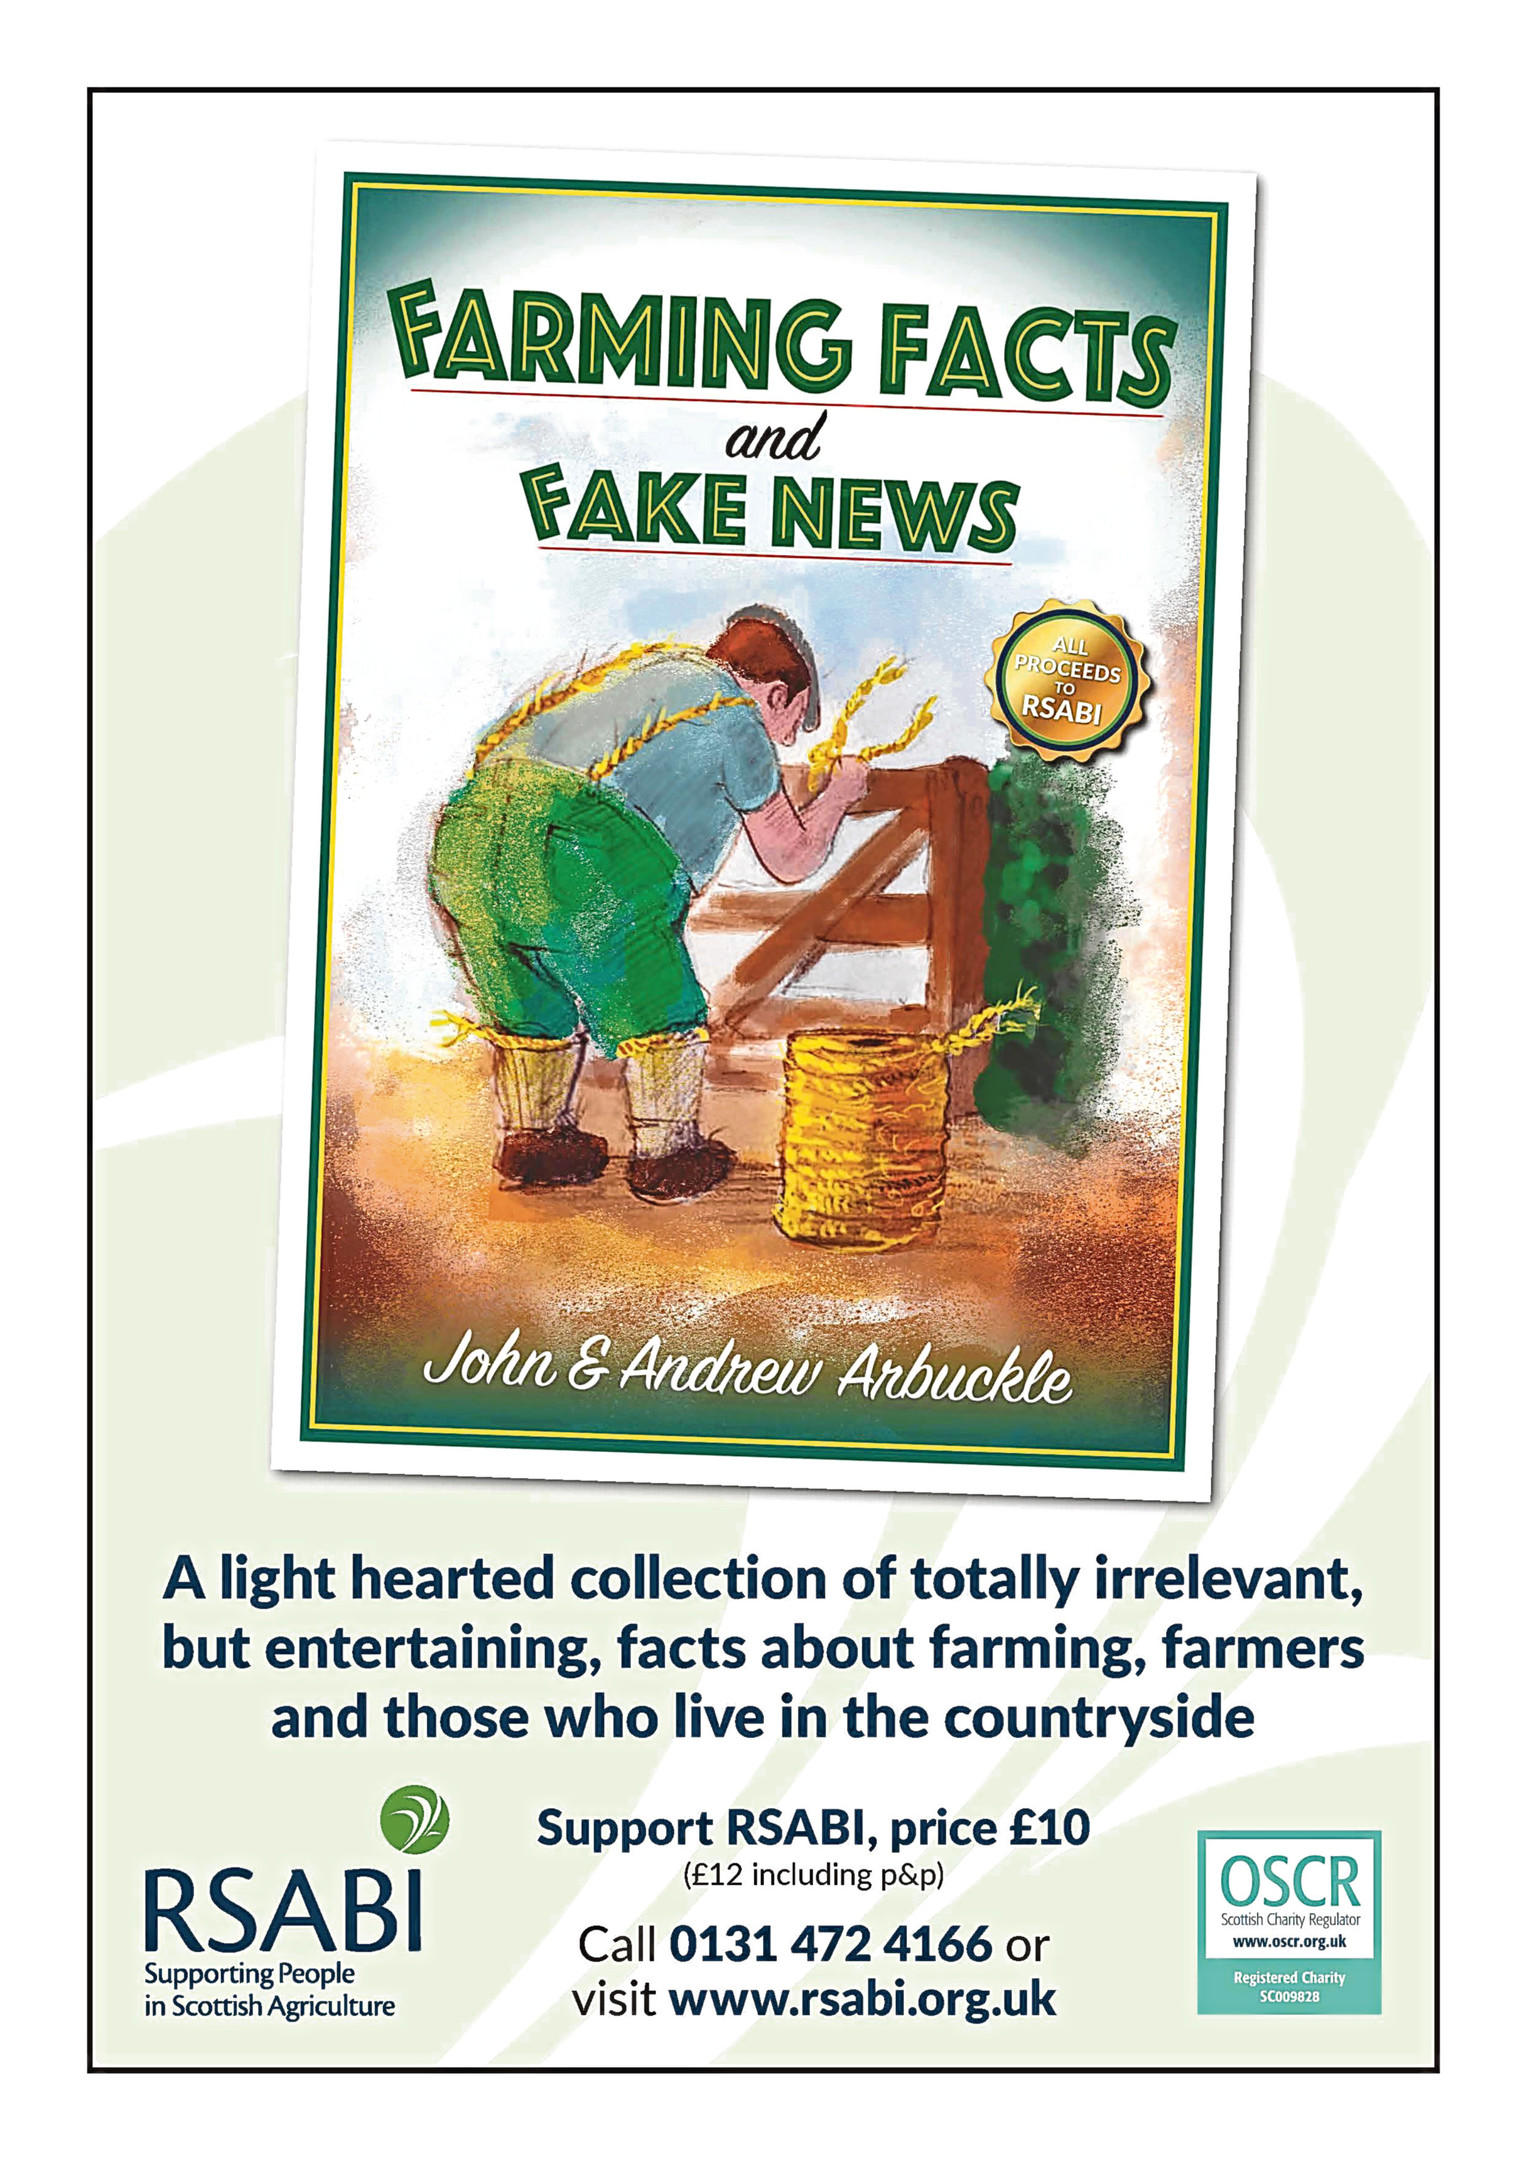 The new book contains lists of farming facts